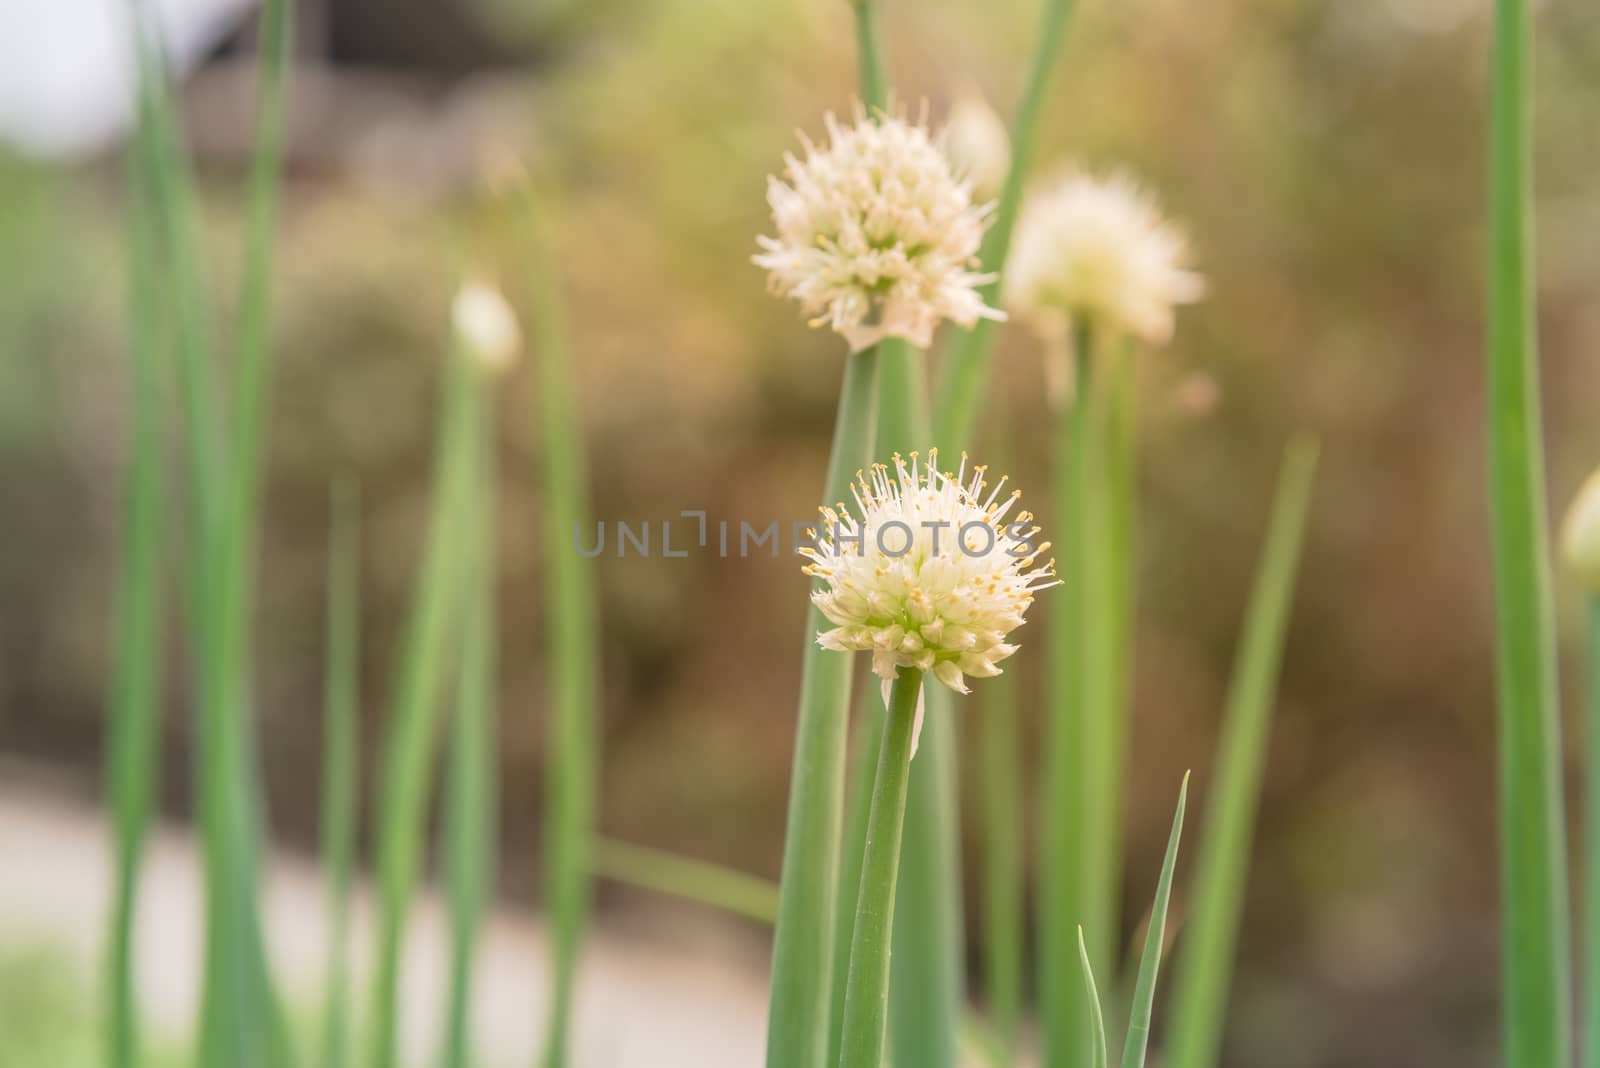 Green onion scallions flowering at organic garden in rural Vietnam during Spring time. Spice herb flower buds close-up